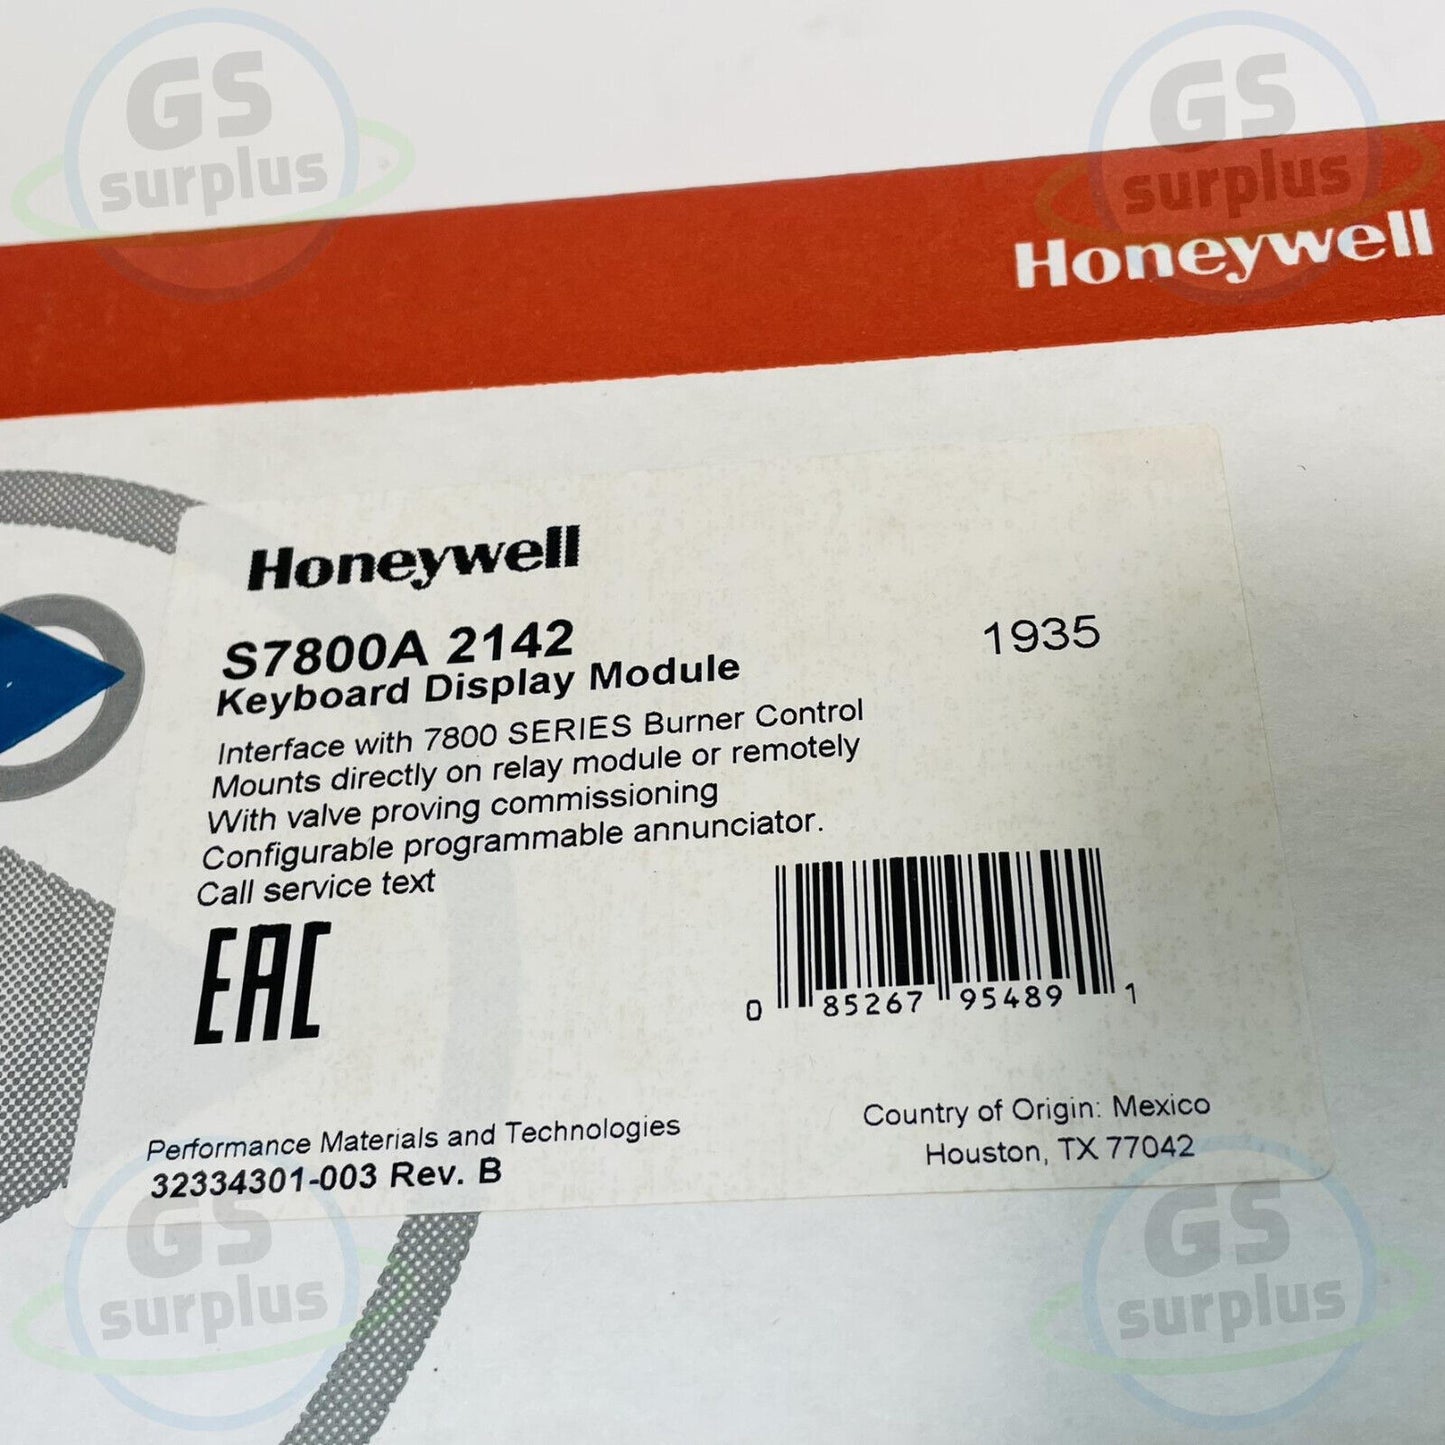 New Honeywell S7800A2142 4-Line Keyboard Display Module - Replaces S7800A1001